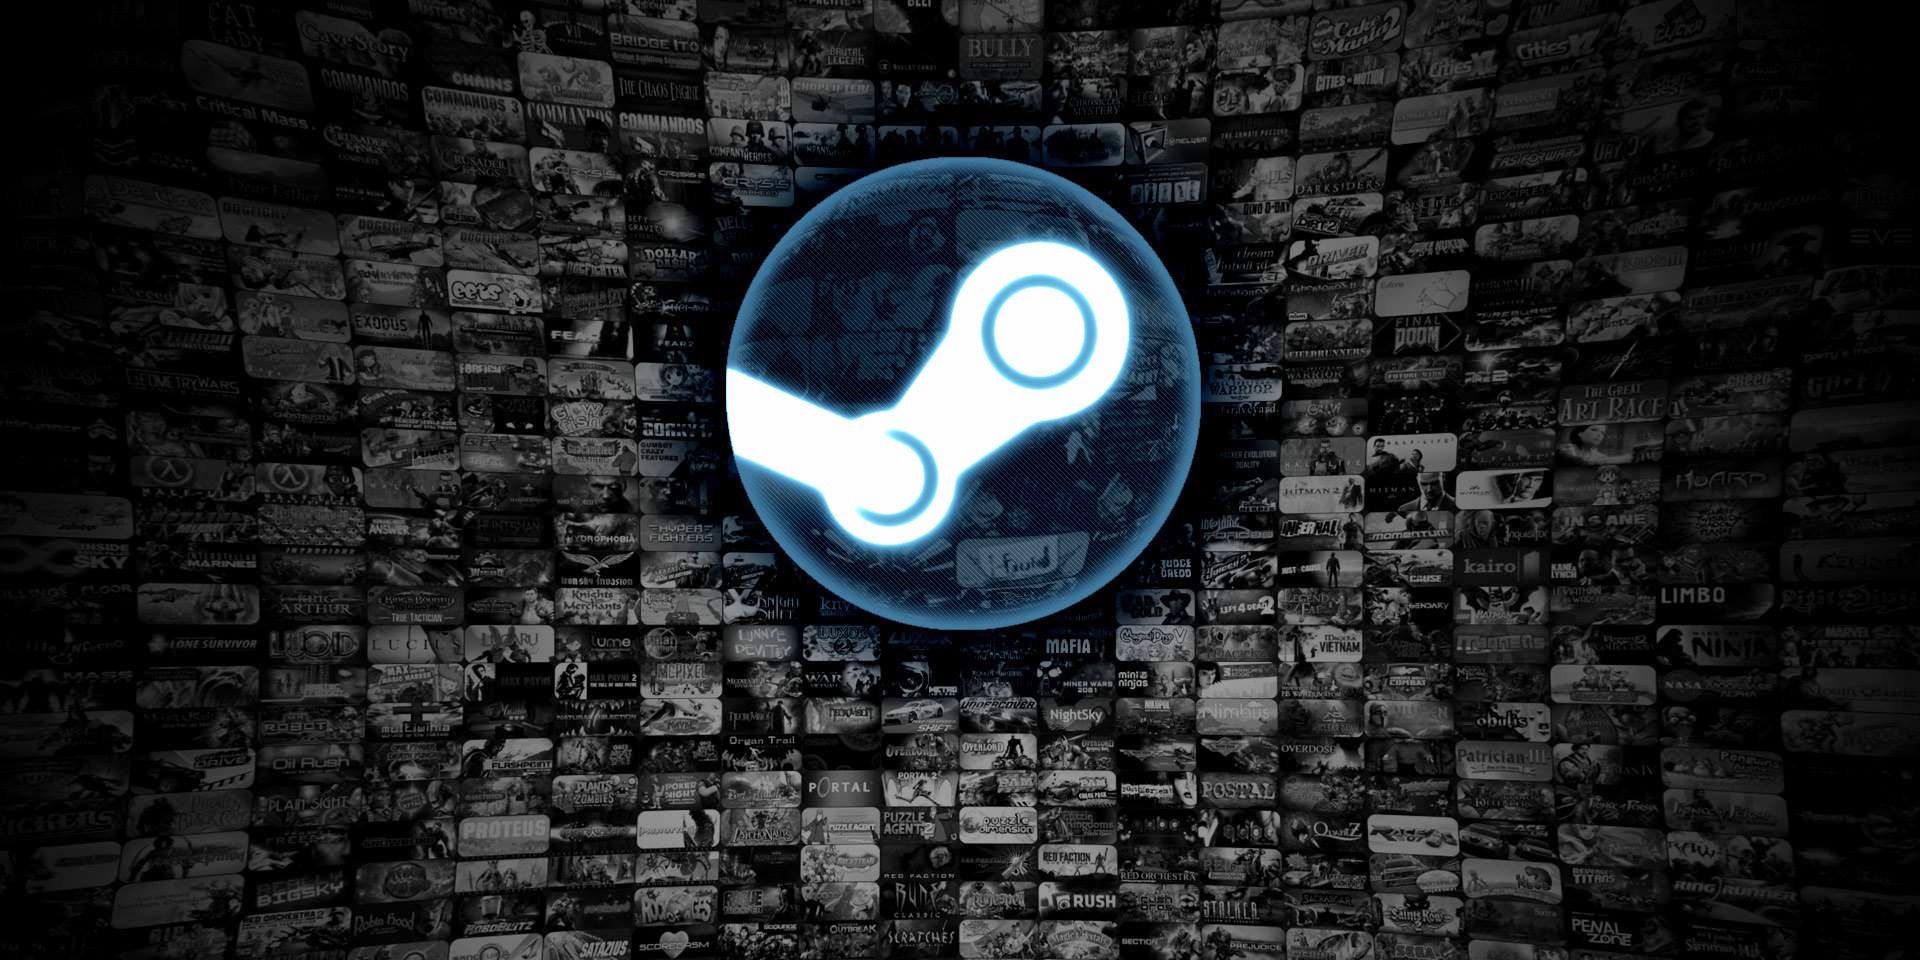 Steam Patches Unlimited Wallet Funds Exploit